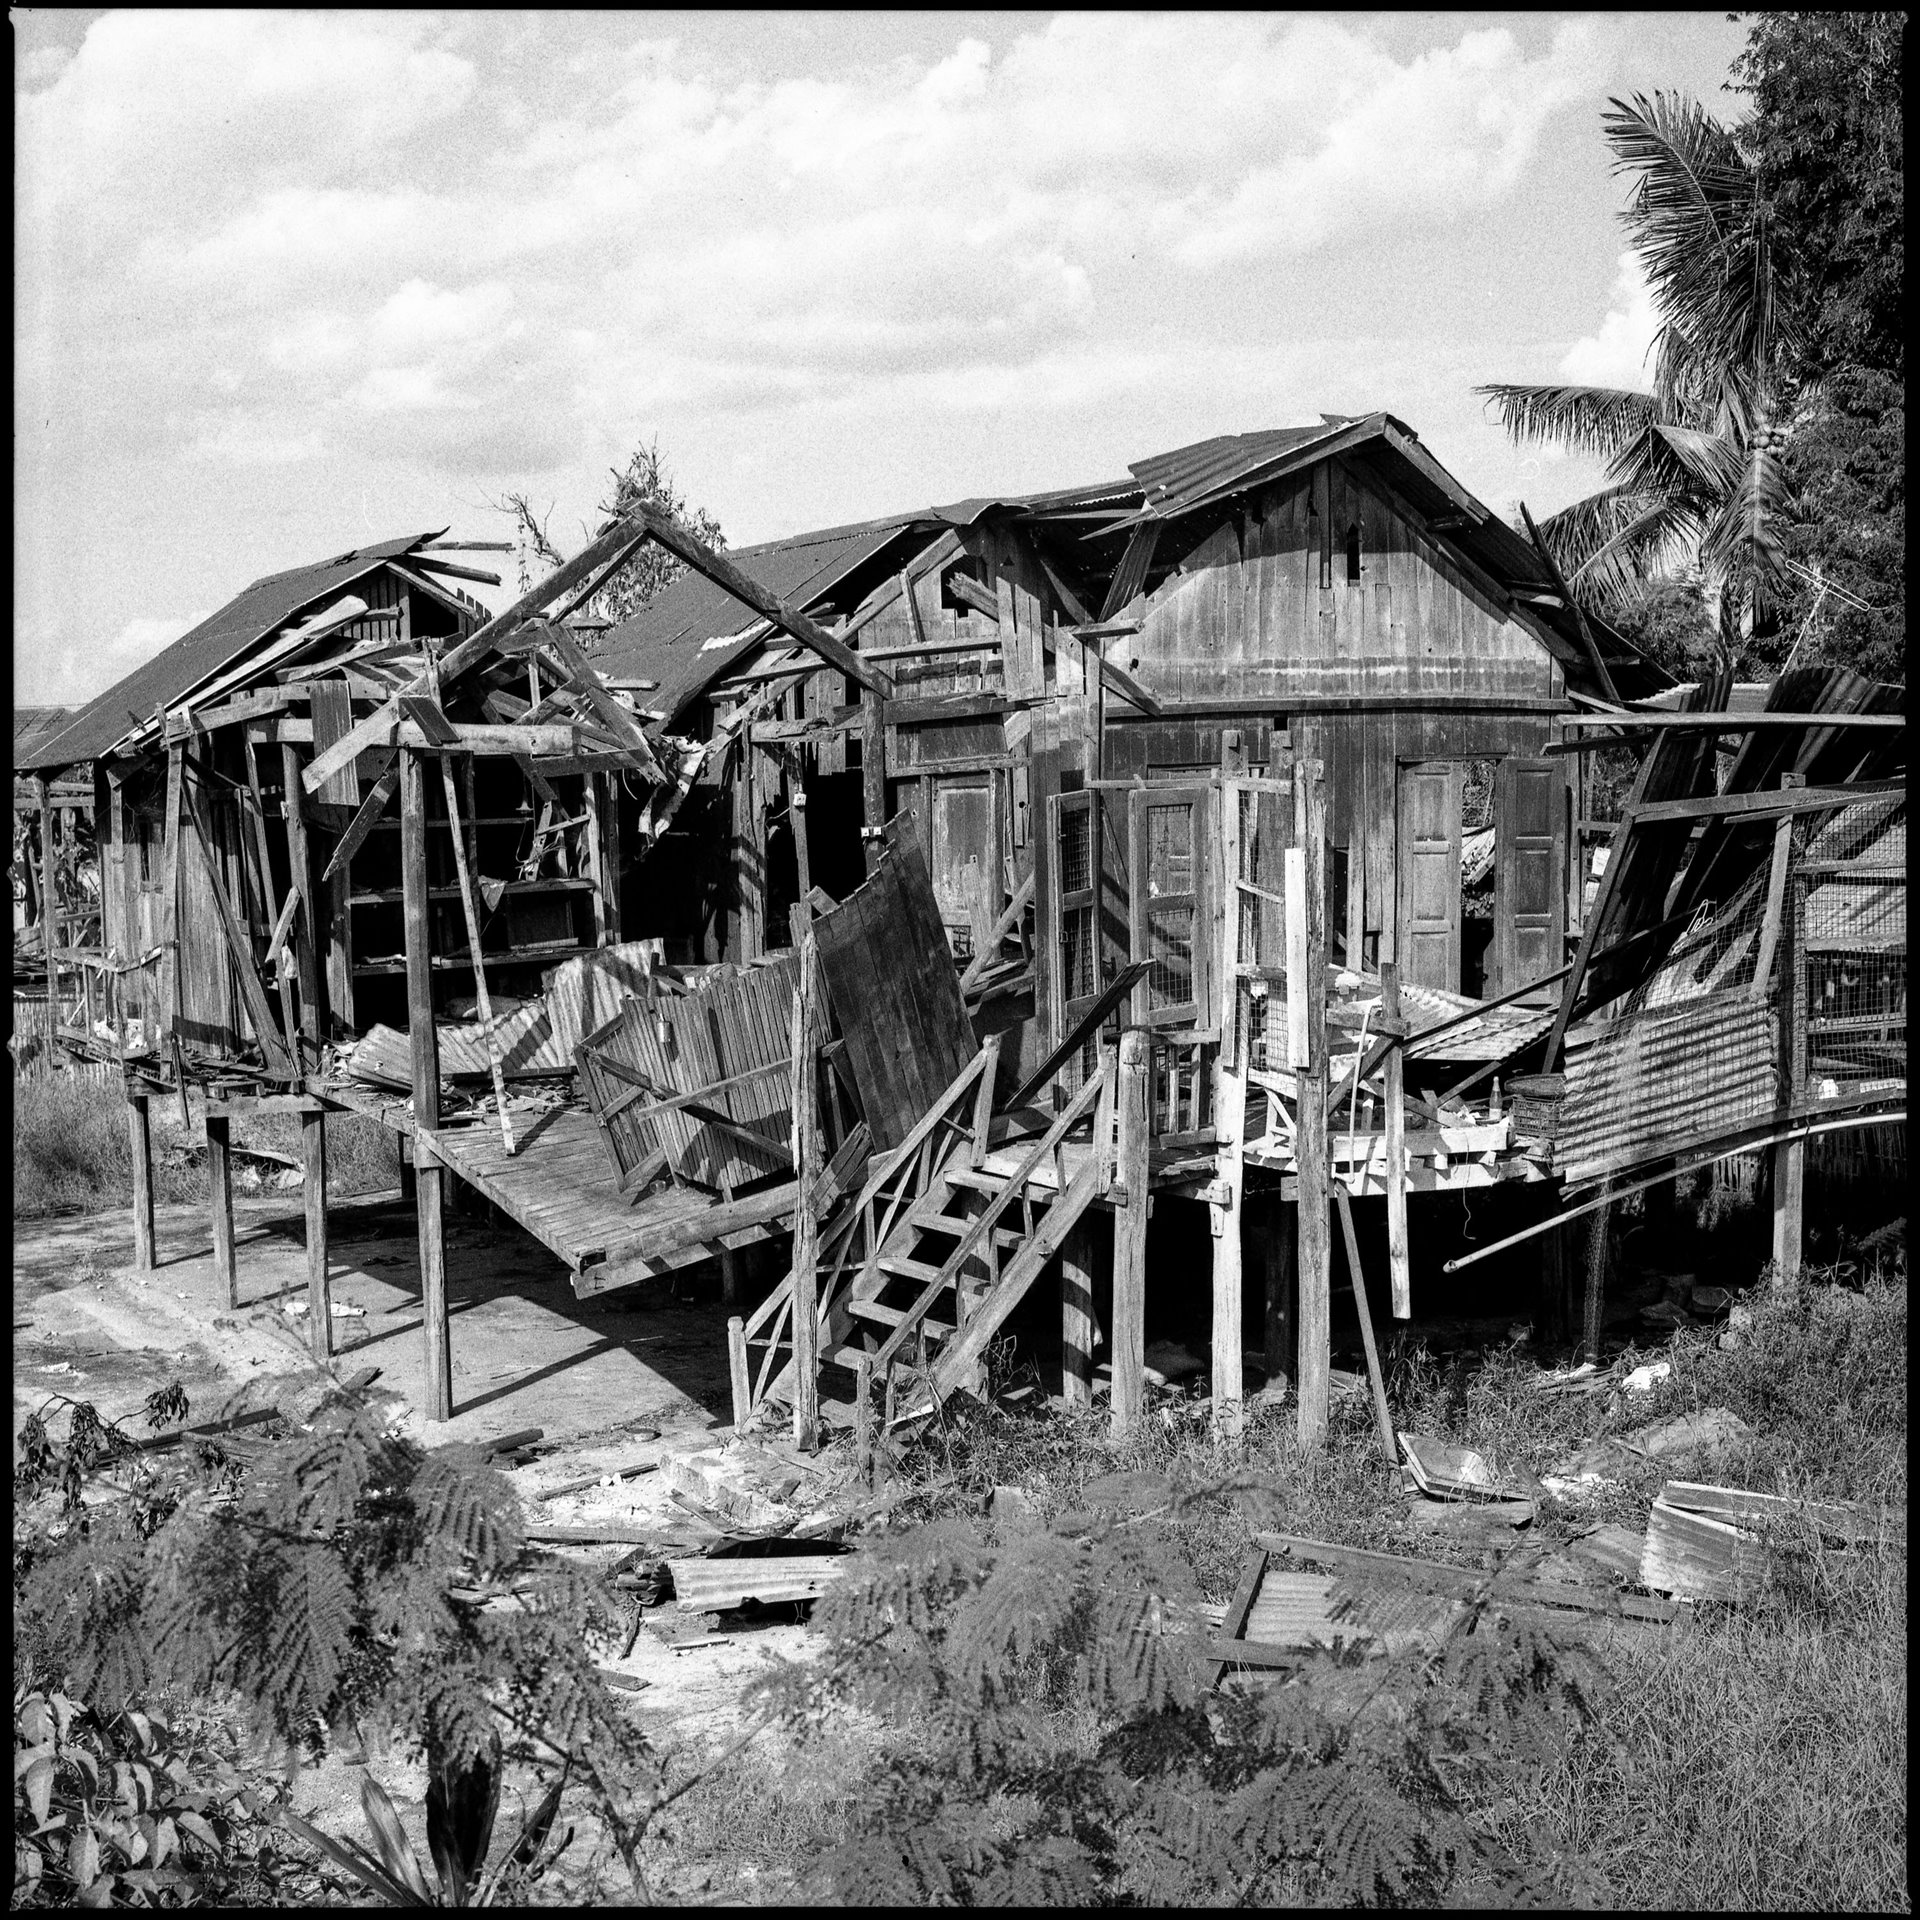 A house destroyed by the Myanmar military in Moe Bye, Shan State, Myanmar. The town was strategically important to the military as it gave them access to roads leading to areas where armed resistance was staunch. Moe Bye was the site of a number of clashes in the conflict and by mid-February 2022 almost all of its 28,000 residents had fled.